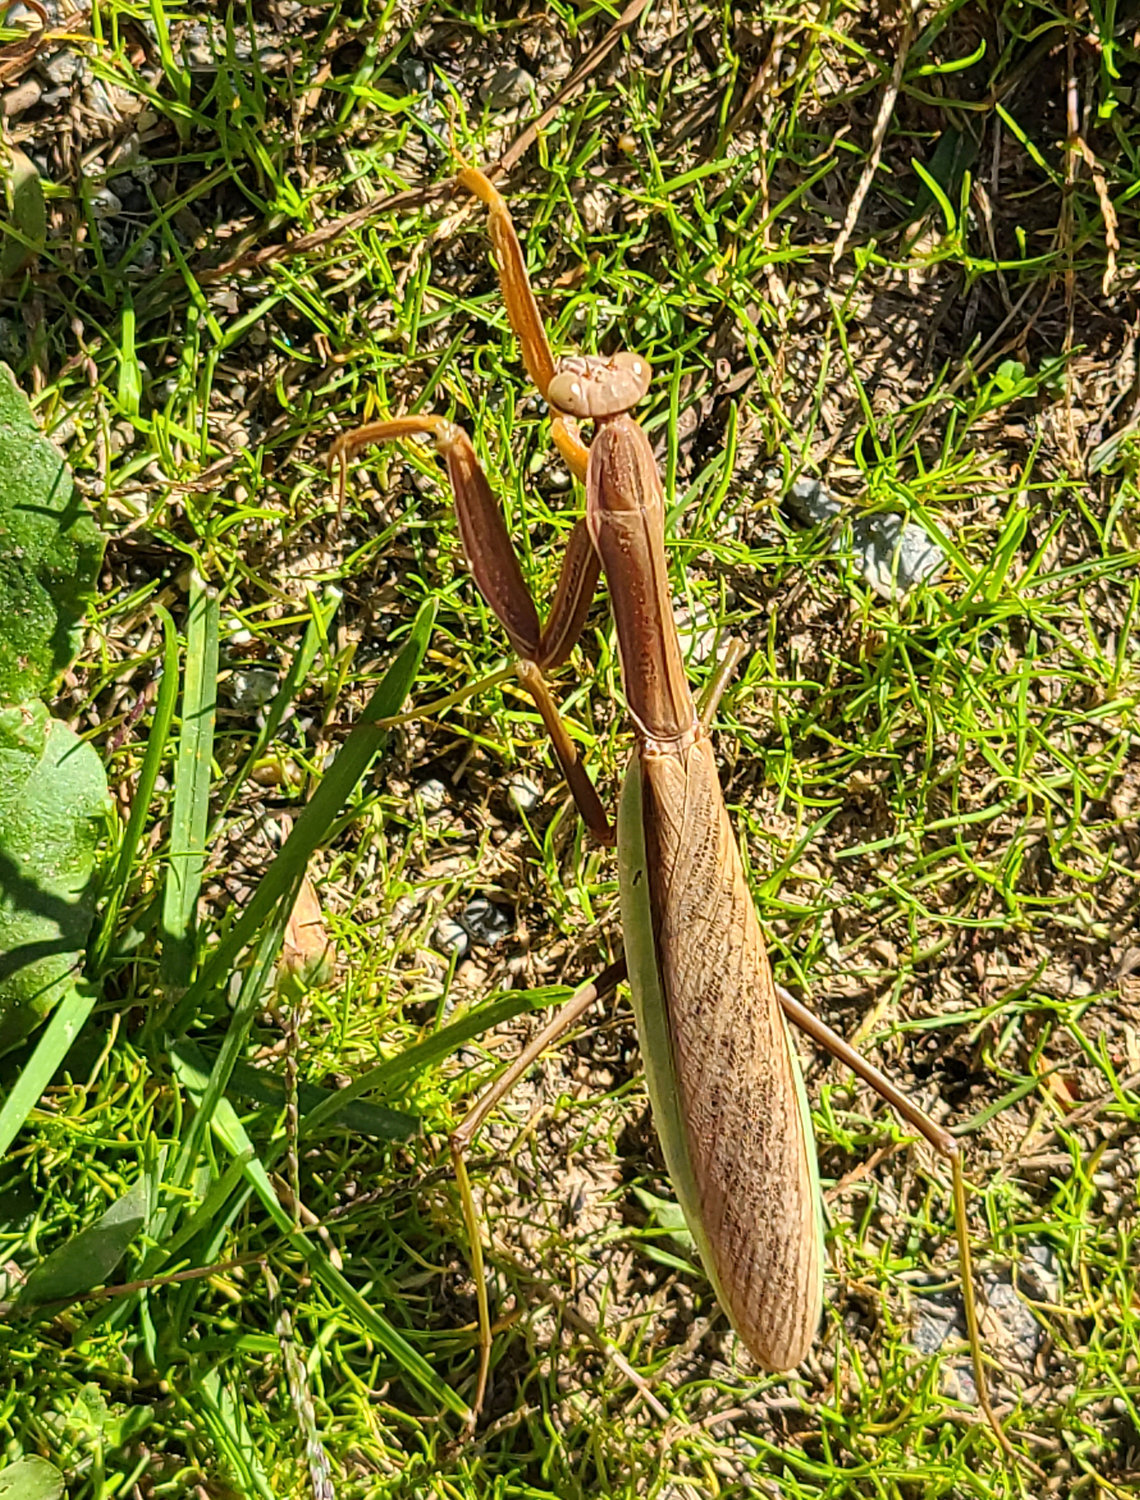 This praying mantis was found on a lawn in early September of this year; this particular insect was described to me as a walkingstick, possibly due to its long legs and brown color. The two pairs of rear legs are very thin, resembling walkingstick legs. The toothy front legs are more substantial, and move lightning-fast to catch prey. Mantises also have wings and can fly for short distances, usually to escape predators.